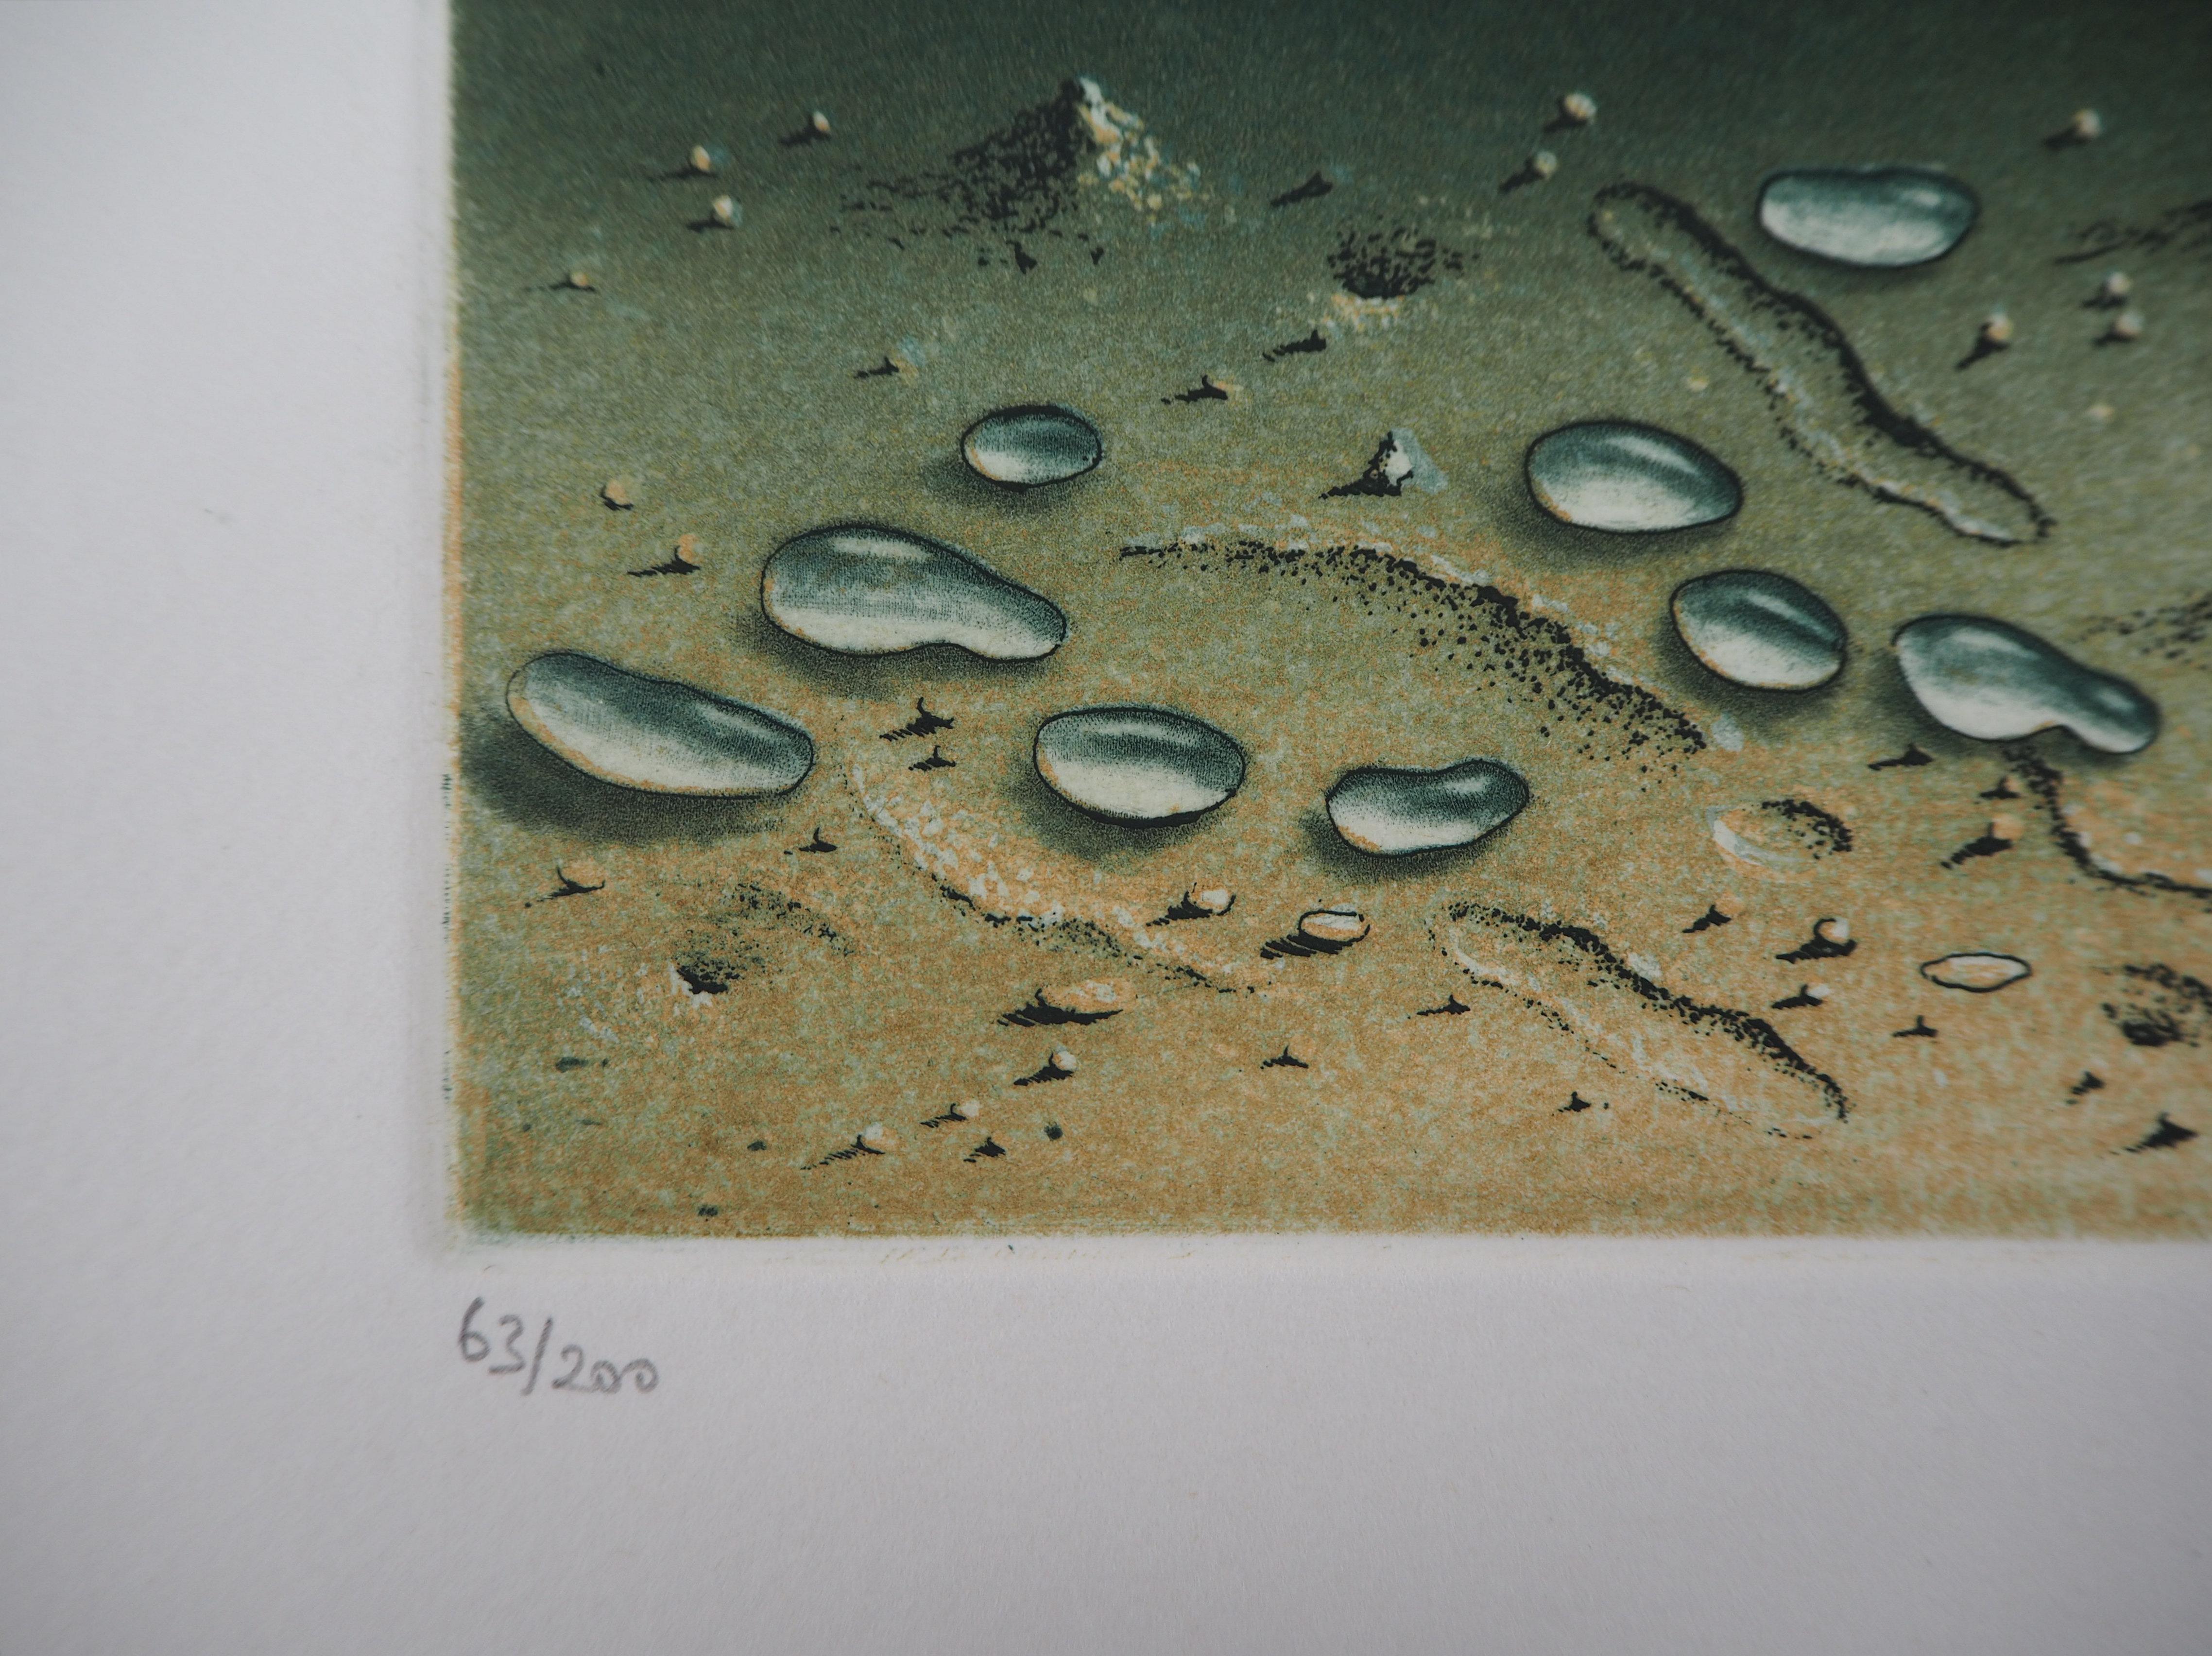 Hiroshi ASADA
Zen : Water Drops on the Sand

Original etching and aquatint
Handsigned in pencil
Numbered / 200
On Arches vellum 16.5 x 21 cm (c. 6.5 x 8 inch)

Excellent condition